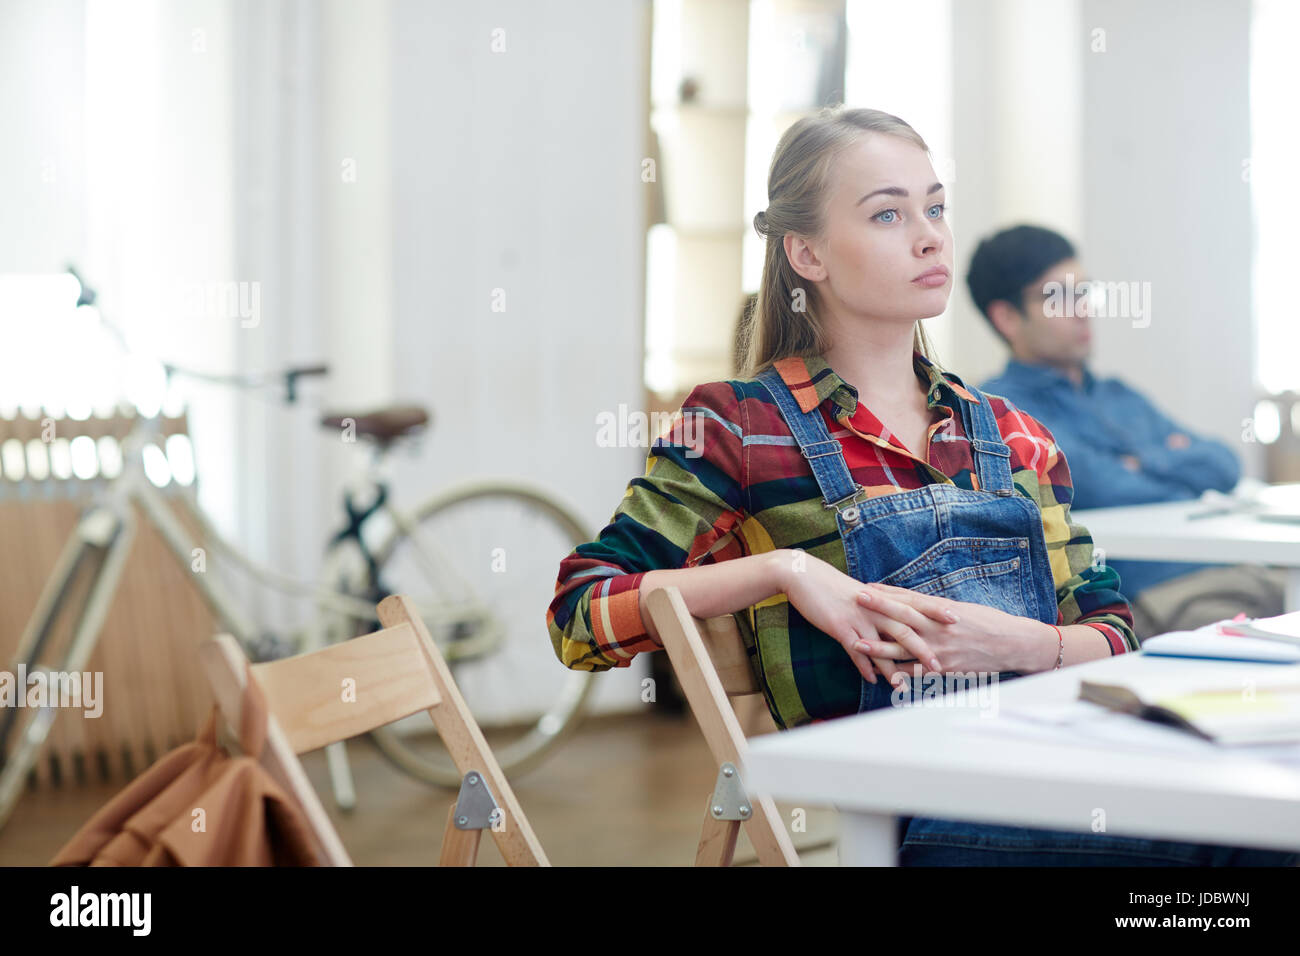 Absent minded girl sitting by desk at lesson Stock Photo